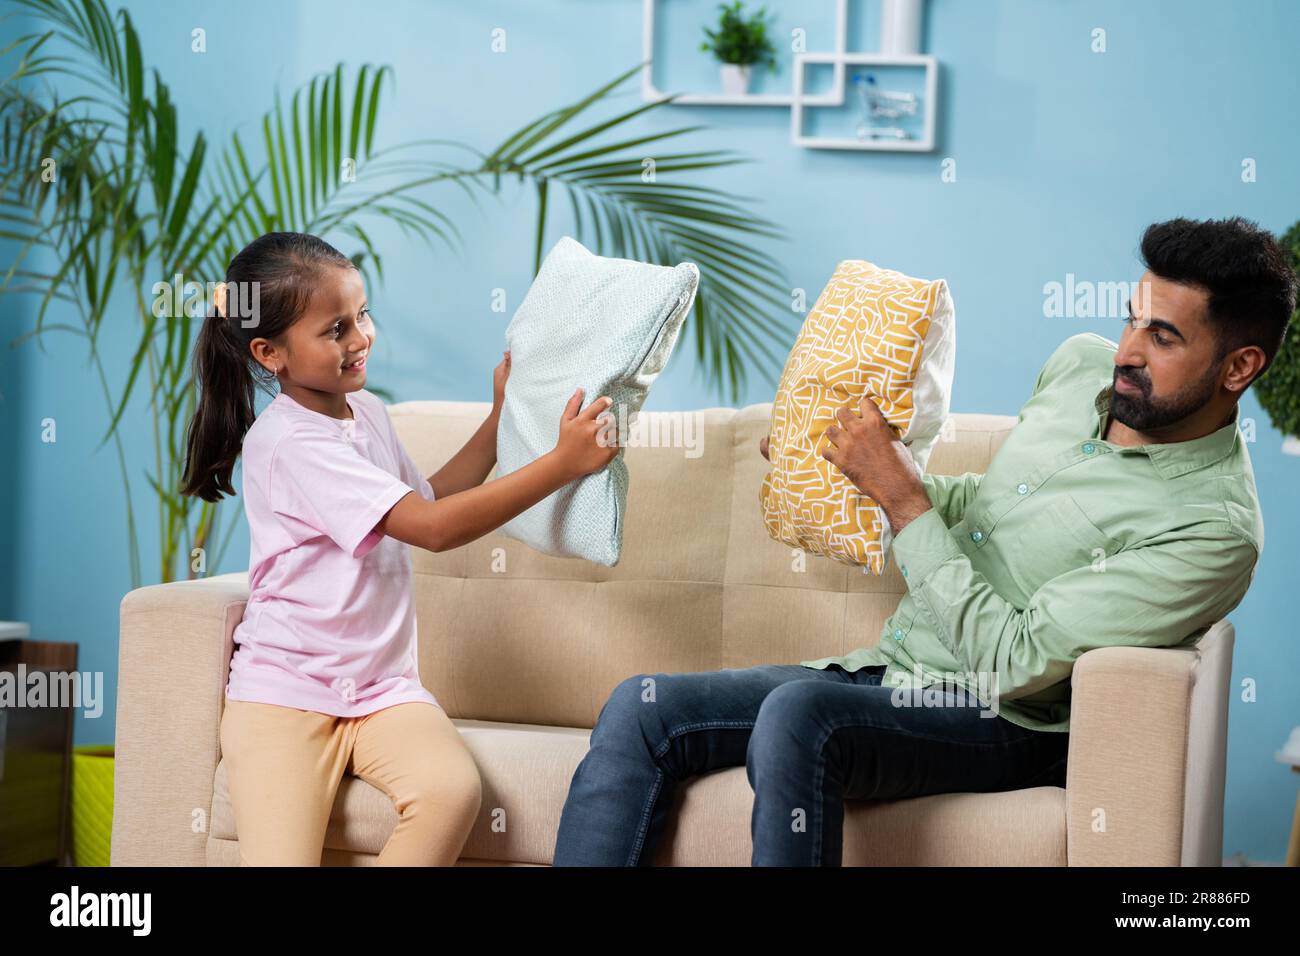 Happy Indian father with daughter playful fighting with pillow at home - concept of fatherhood, weekend playtime and family bonding Stock Photo